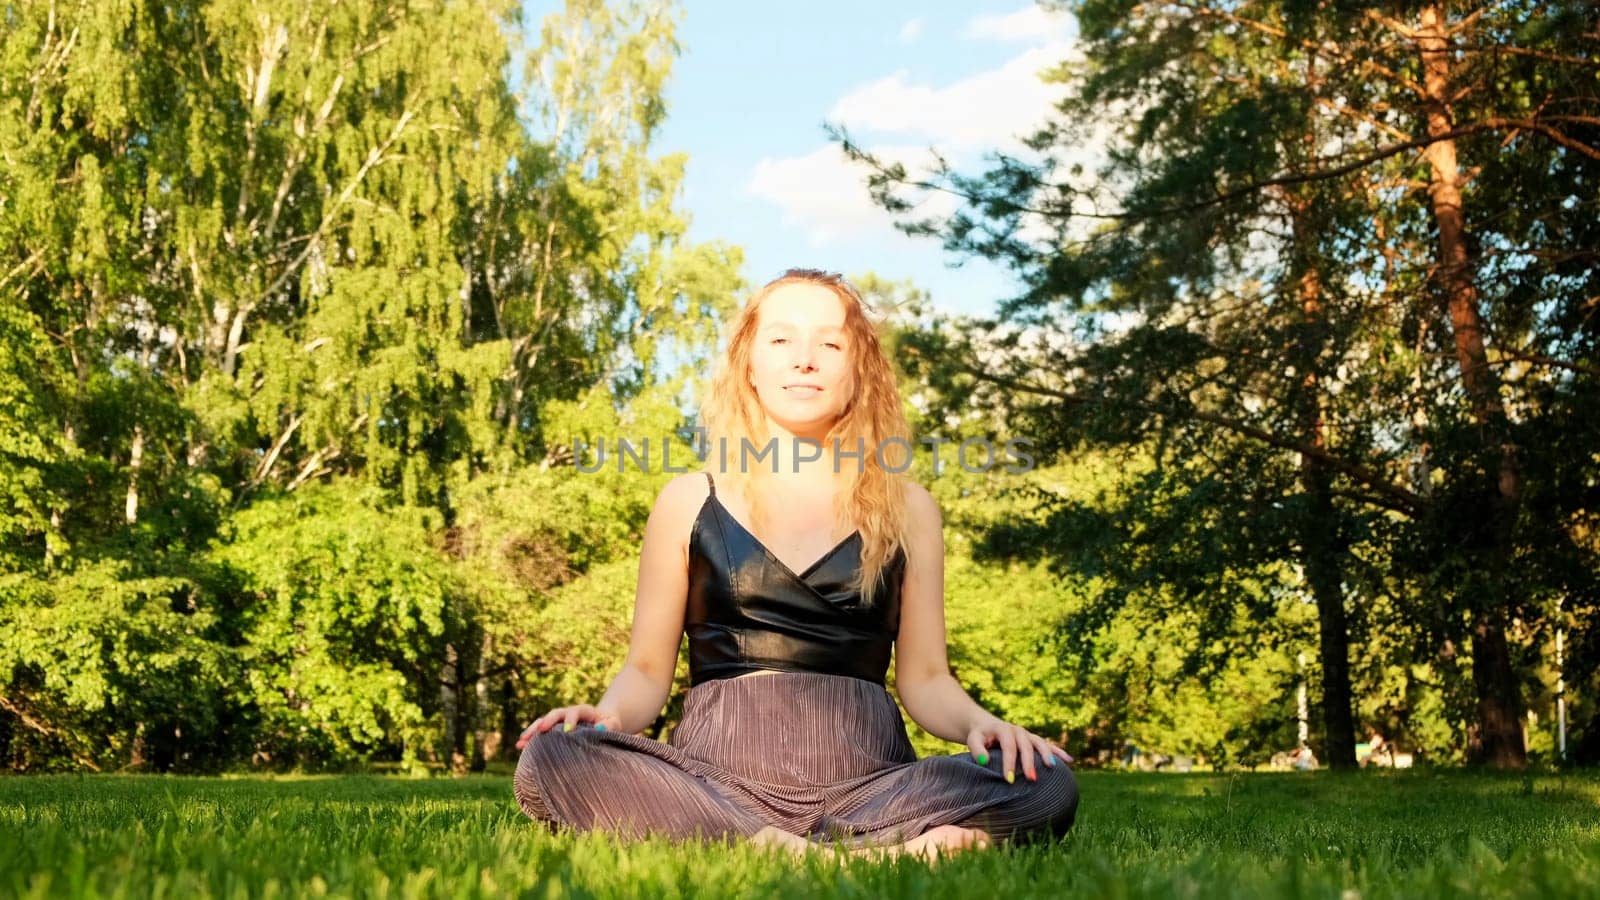 Meditation in the lotus position. Concept. A beautiful woman sitting in a clearing and meditating with her legs crossed. High quality 4k footage